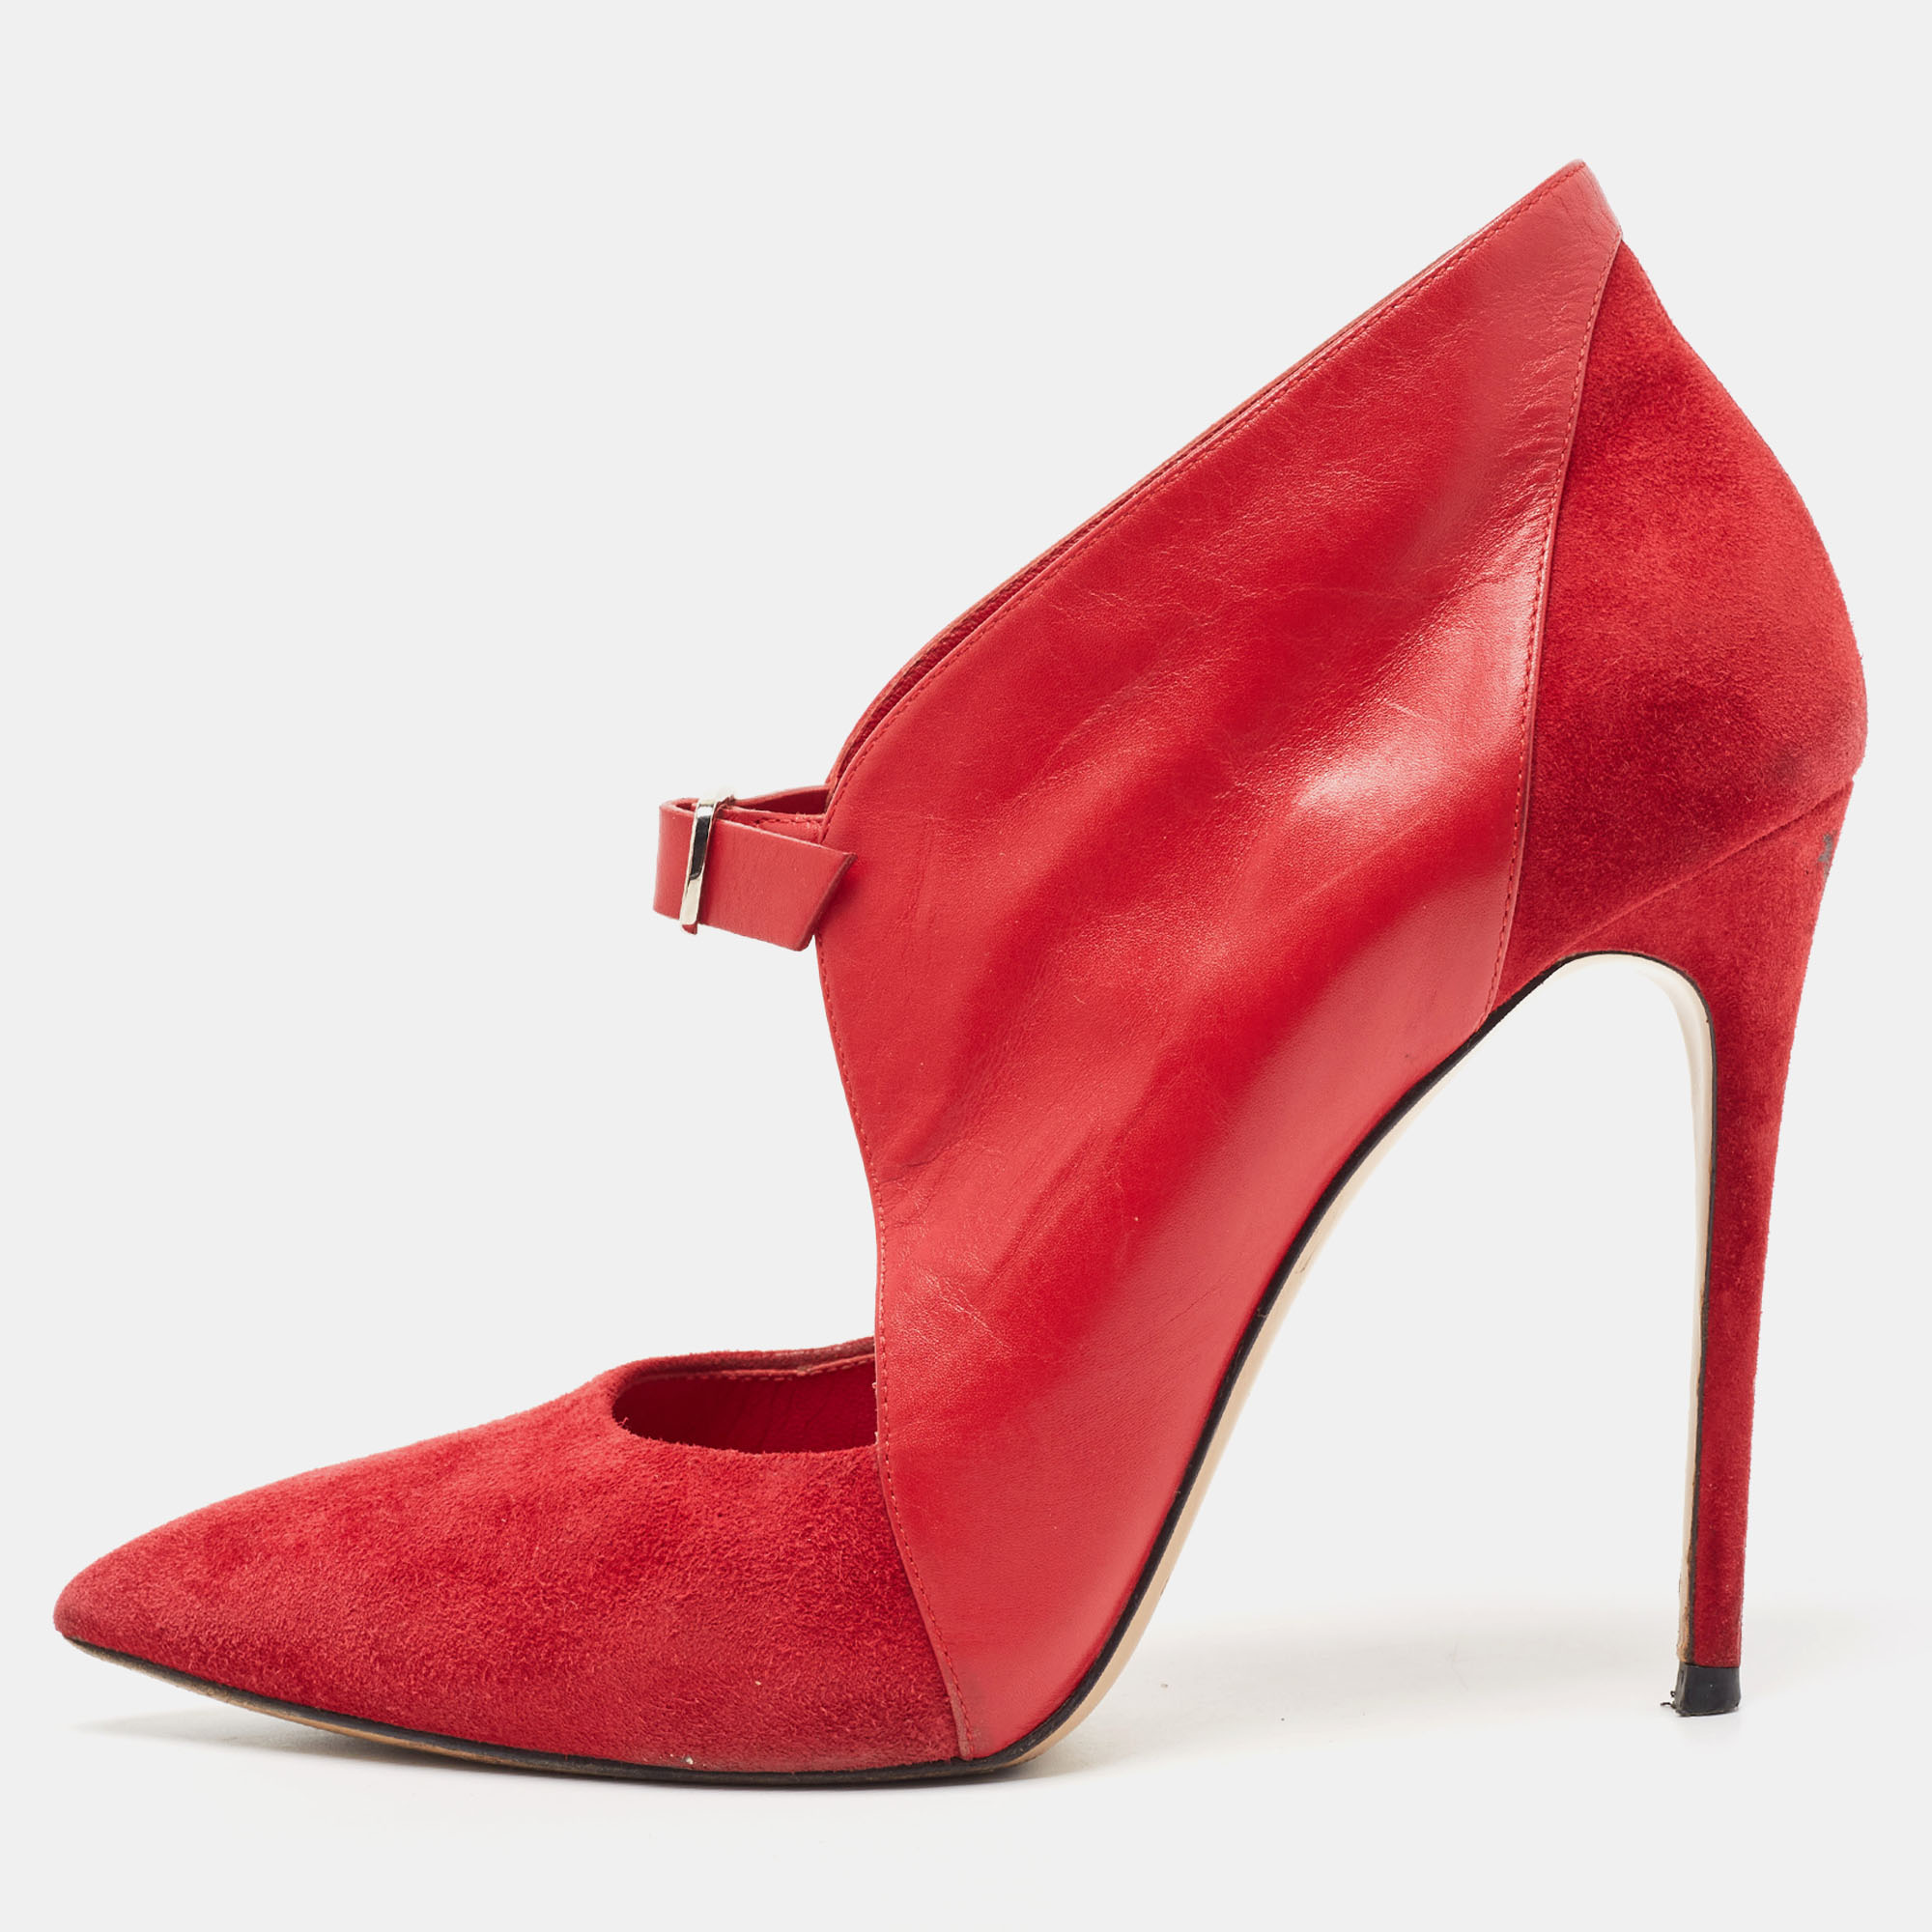 The fashion house's tradition of excellence coupled with modern design sensibilities works to make these Casadei red booties a fabulous choice. Theyll help you deliver a chic look with ease.